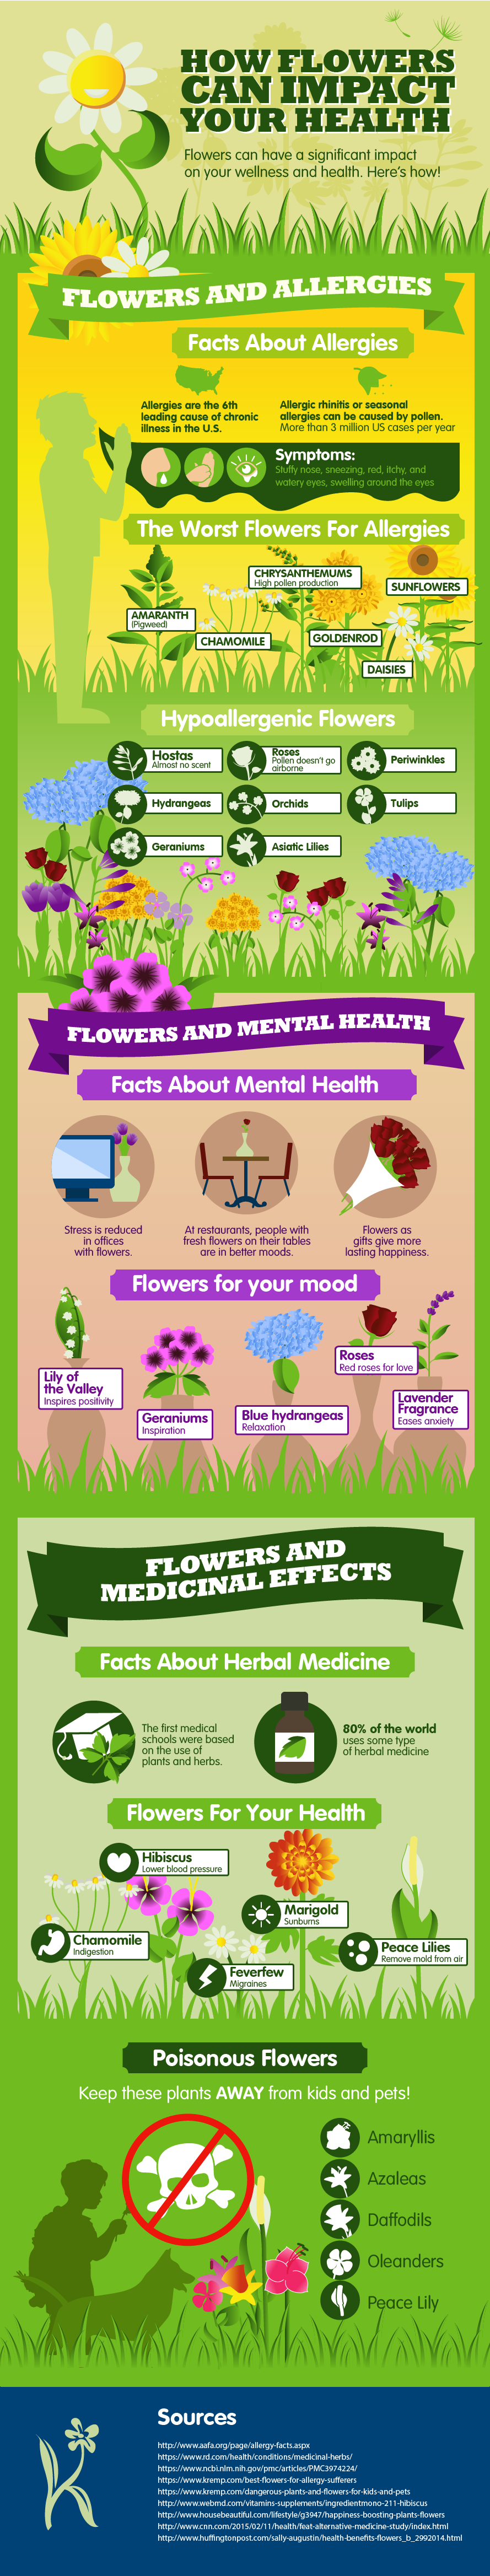 Flowers, Allergies, Mental Health & Medicinal Effects - Anglia ...